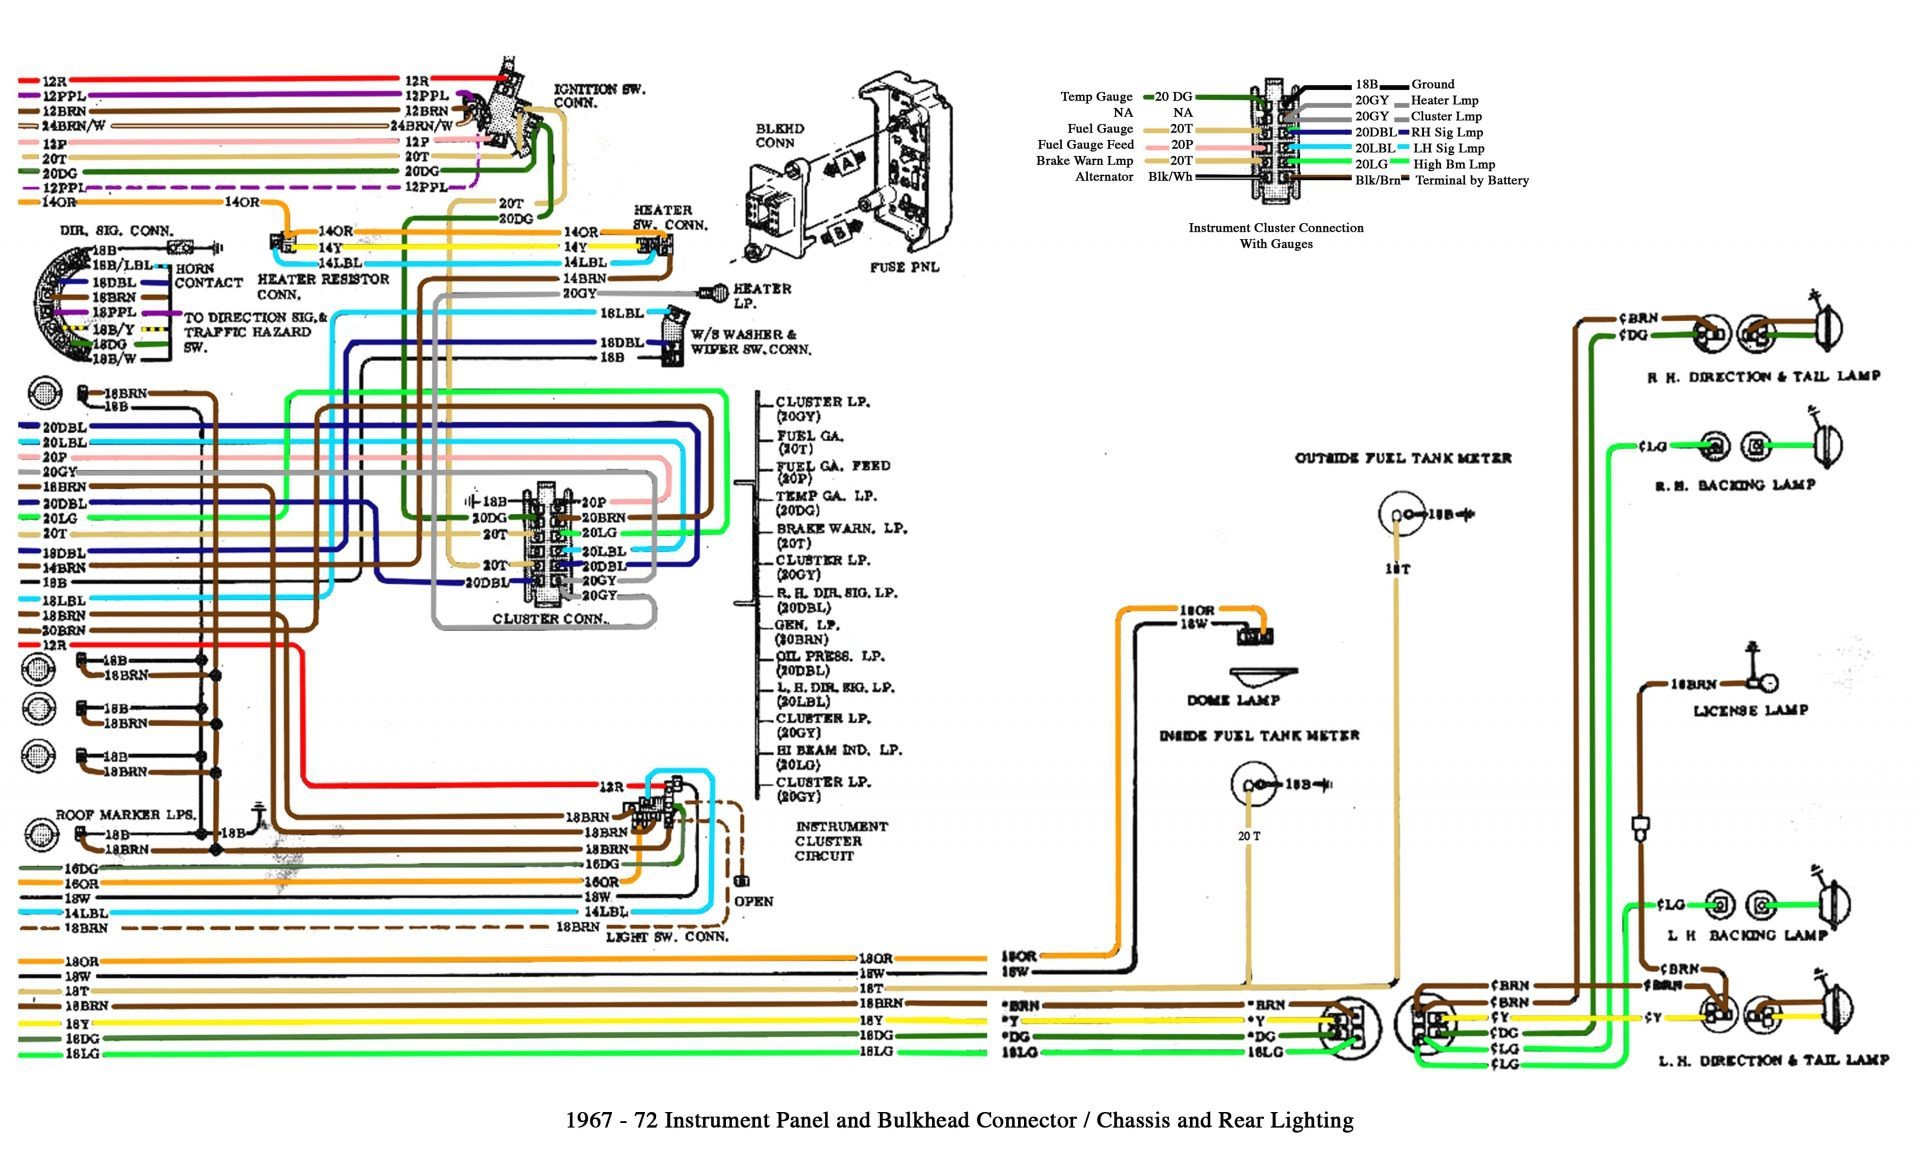 Wiring Diagram for Clarion Car Stereo Best Speaker Wiring Diagram Diagram Of Wiring Diagram for Clarion Car Stereo